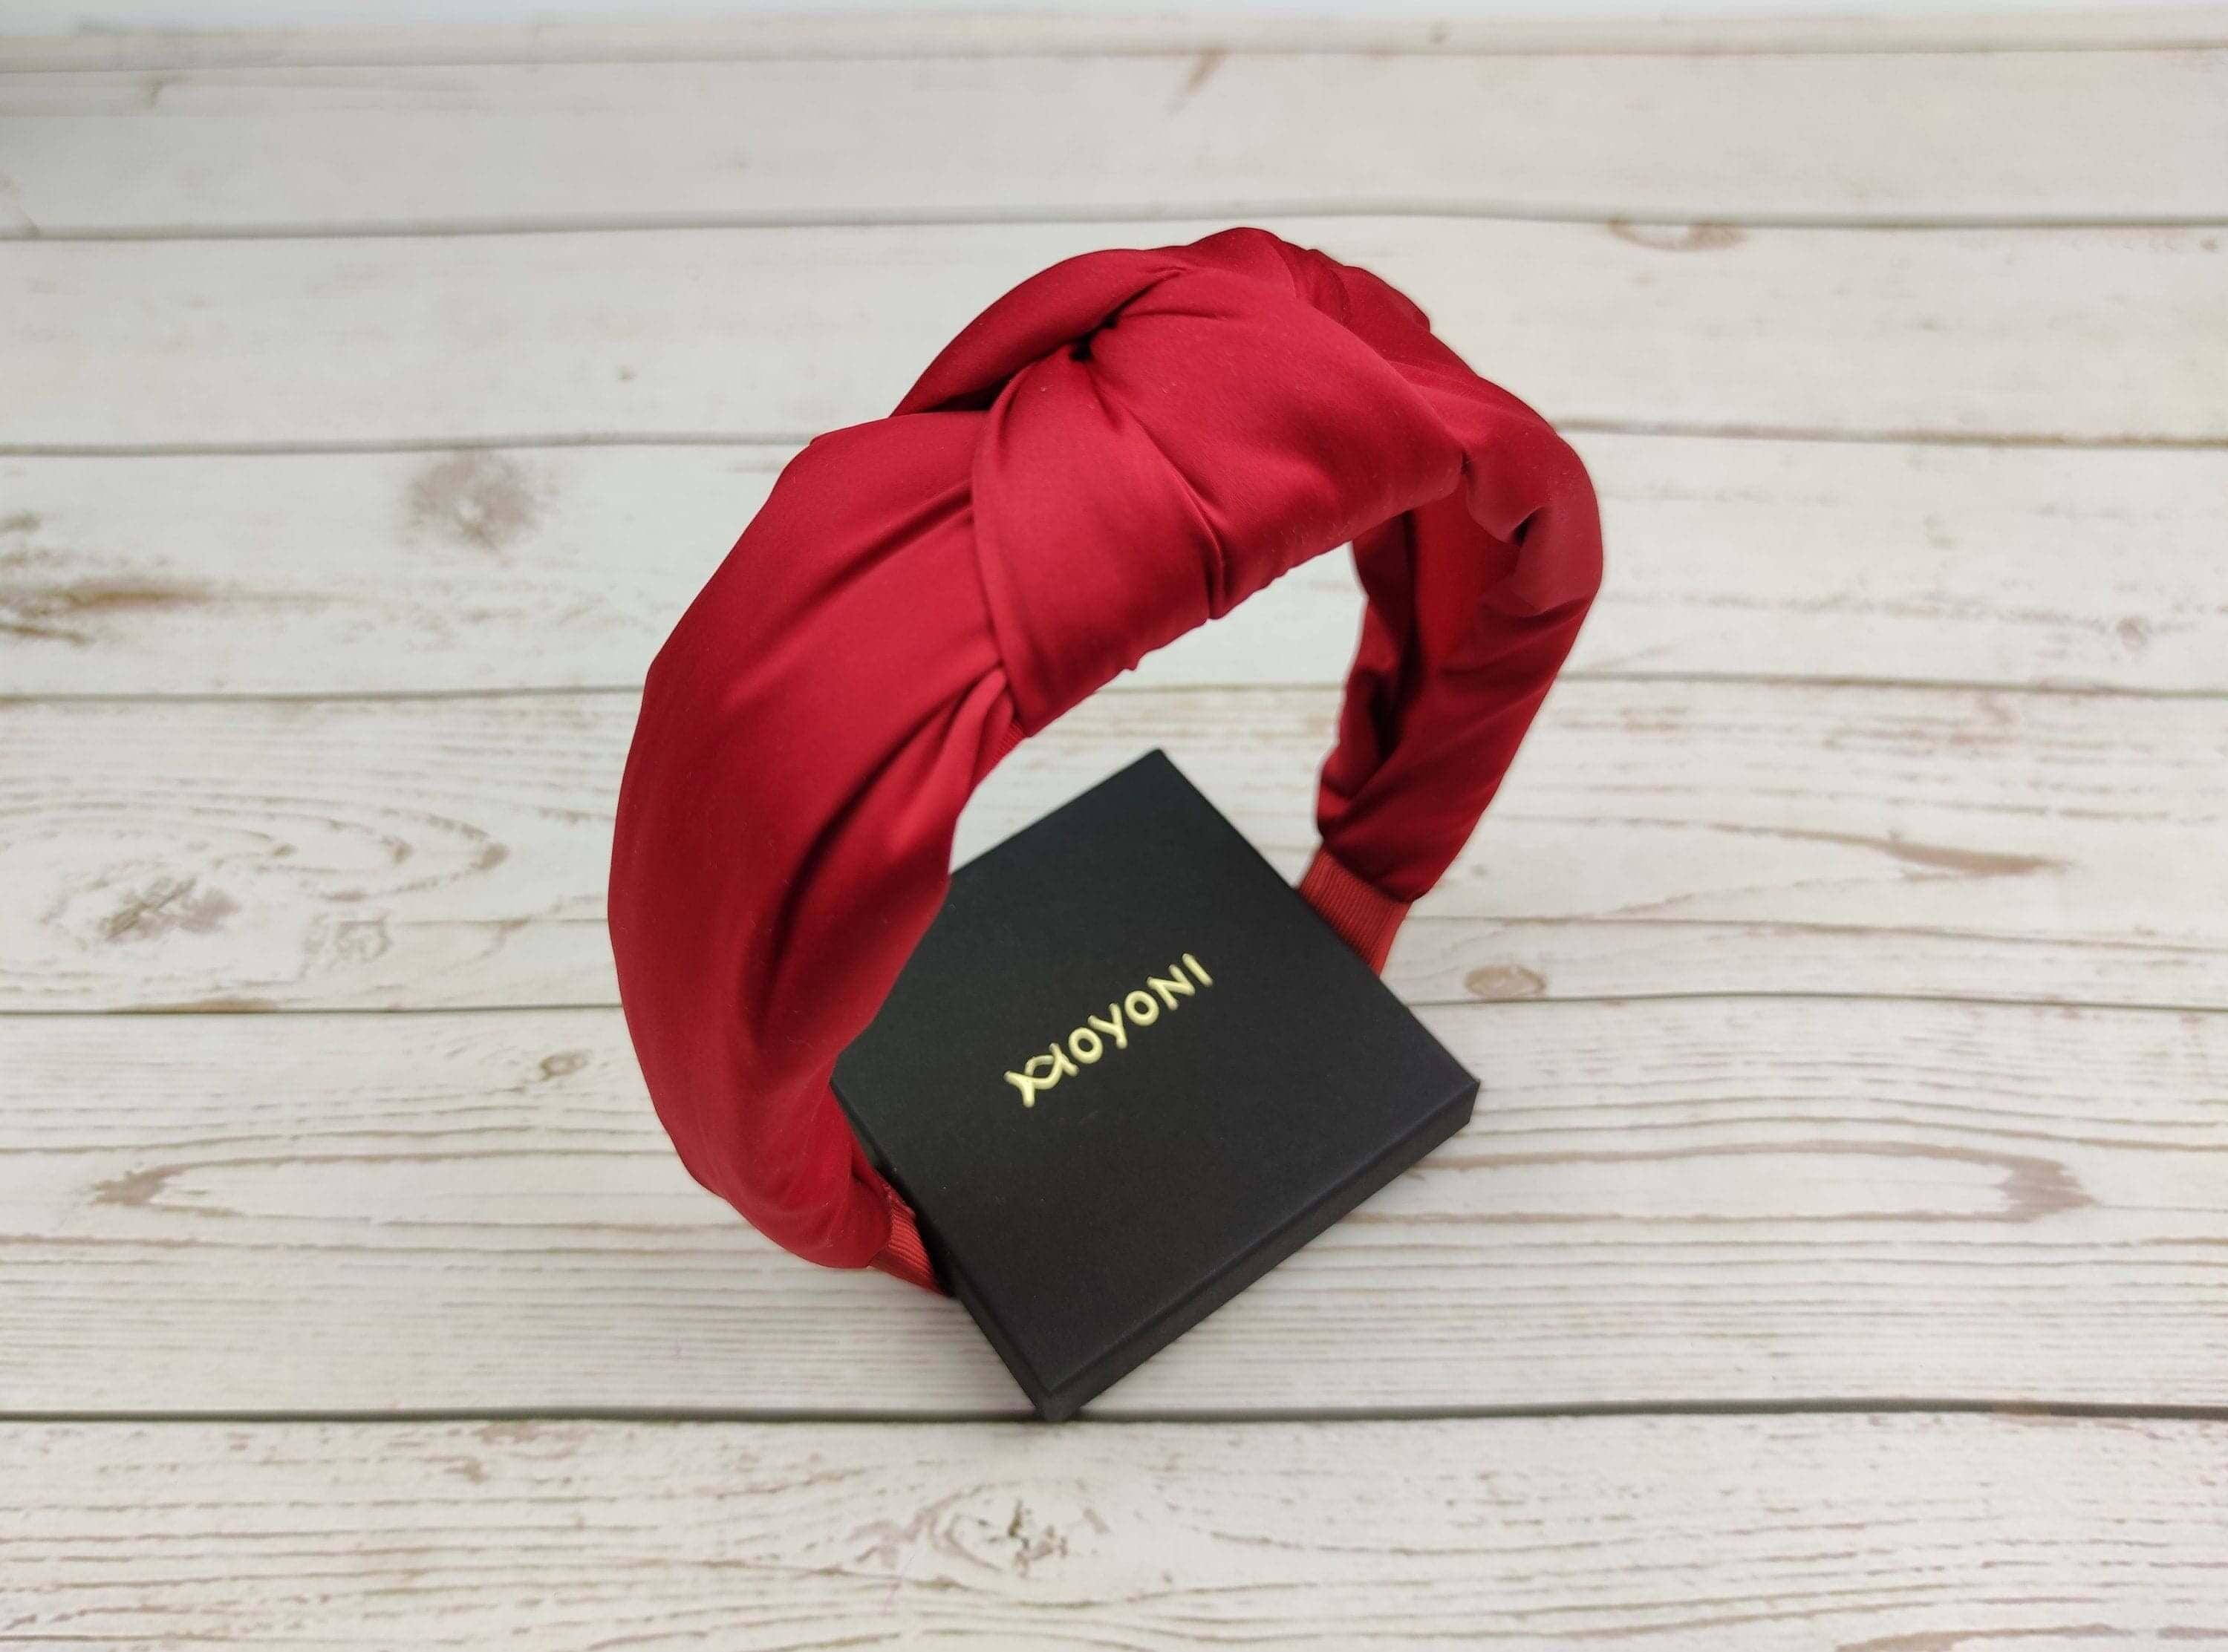 Premium Stylish and Comfortable Bright Red Satin Headband with Padded for Women - Perfect Gift for Her! available at Moyoni Design